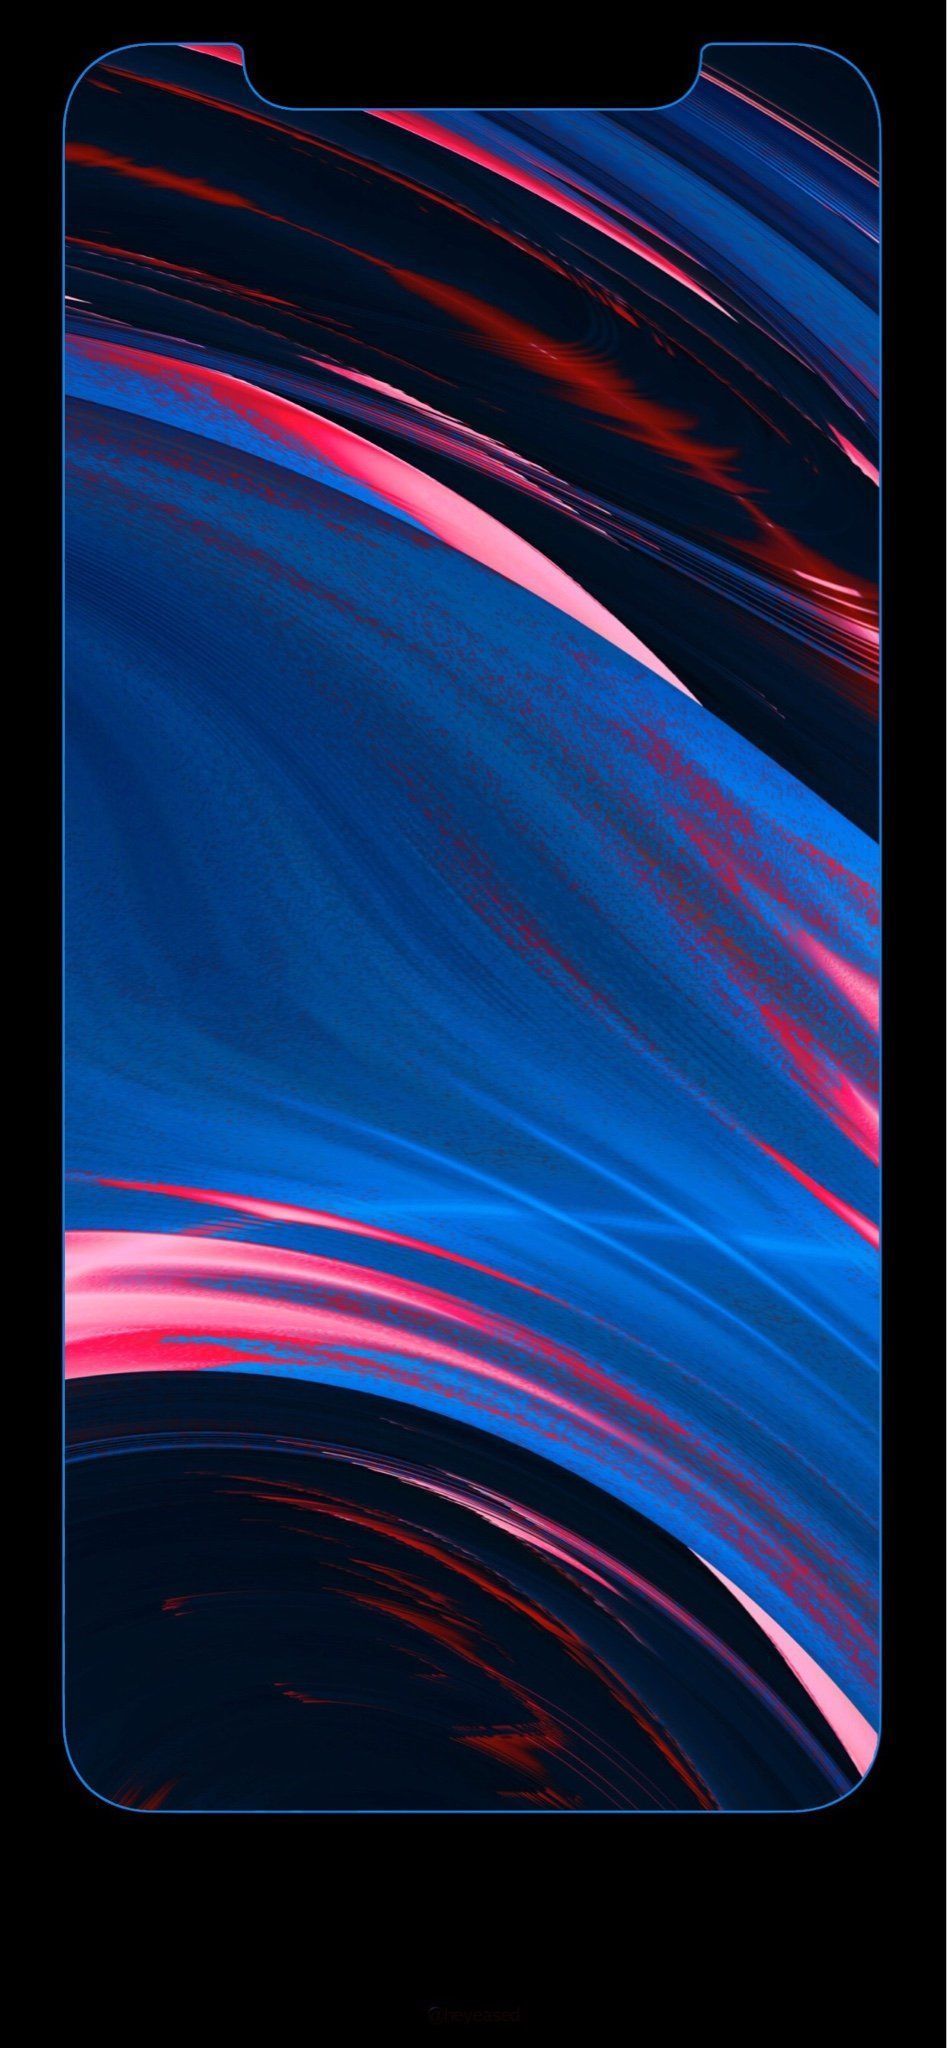 iPhone 12 Pro Max HD Wallpaper. Apple Wallpaper. HD Wallpaper. iPhone Wallpaper. iPhone 12 4K of Wallpaper for Andriod